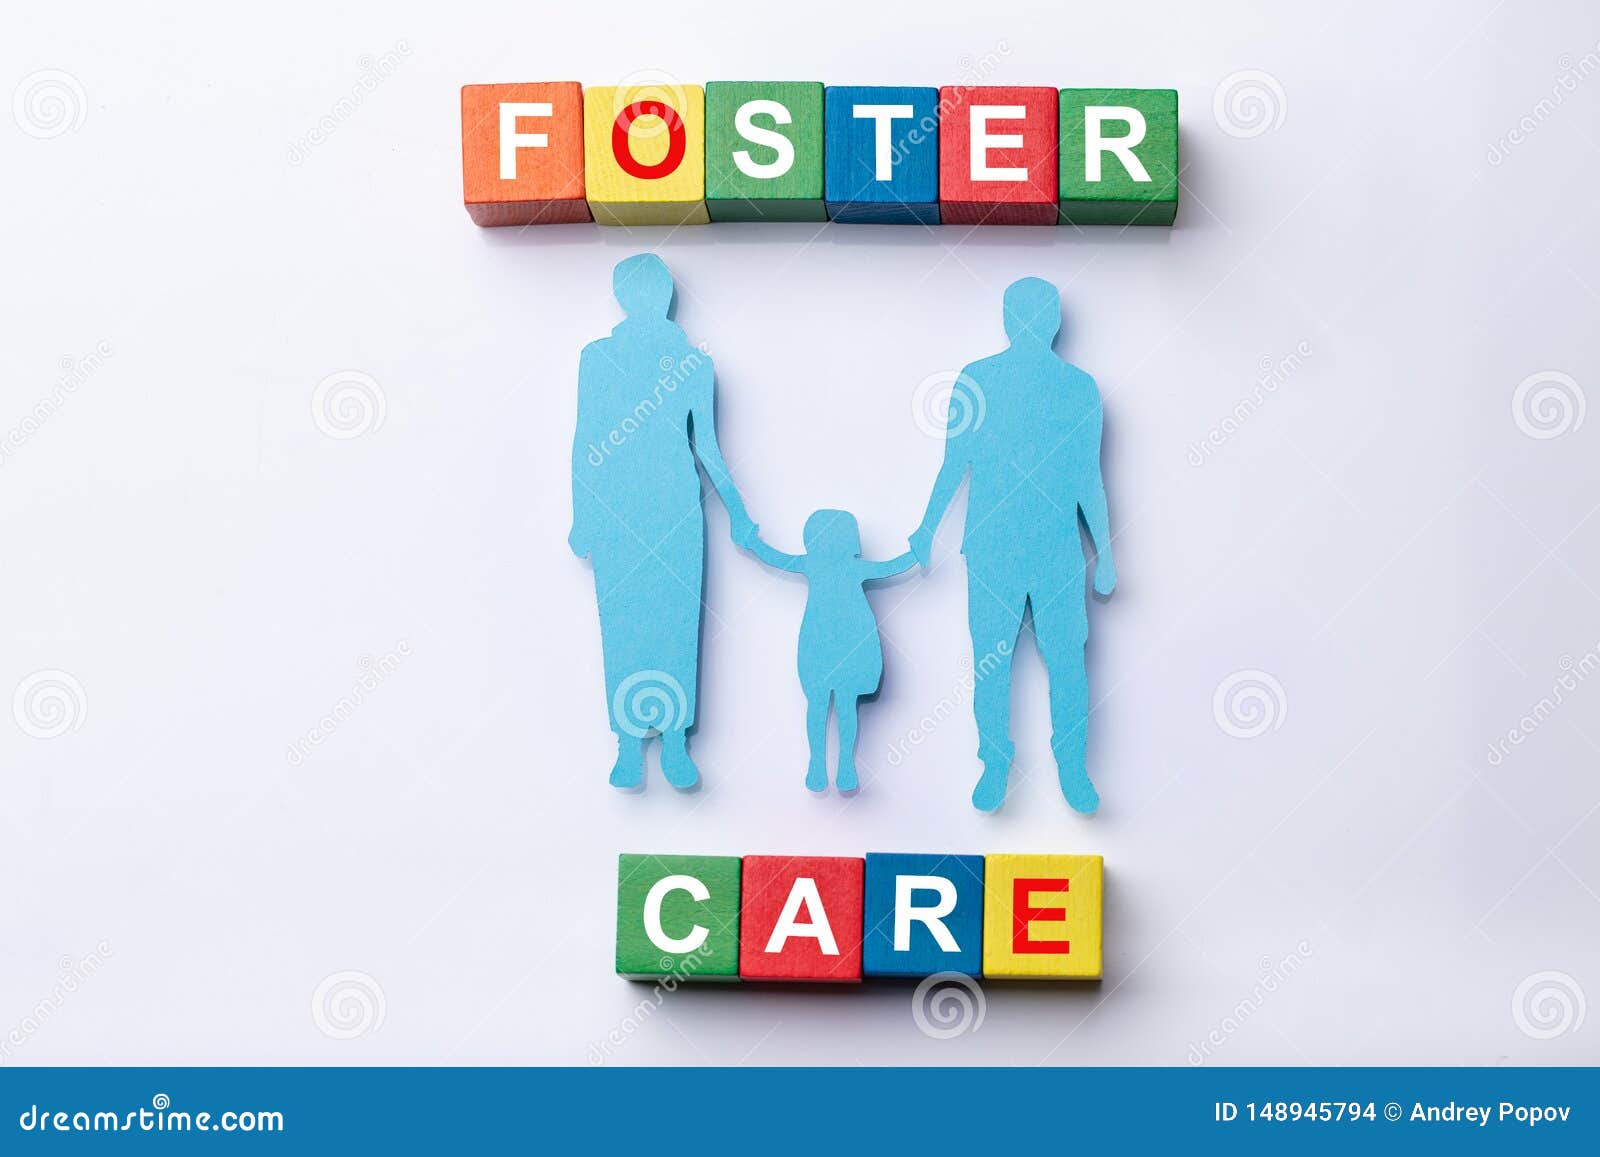 foster care cubic blocks with family figures